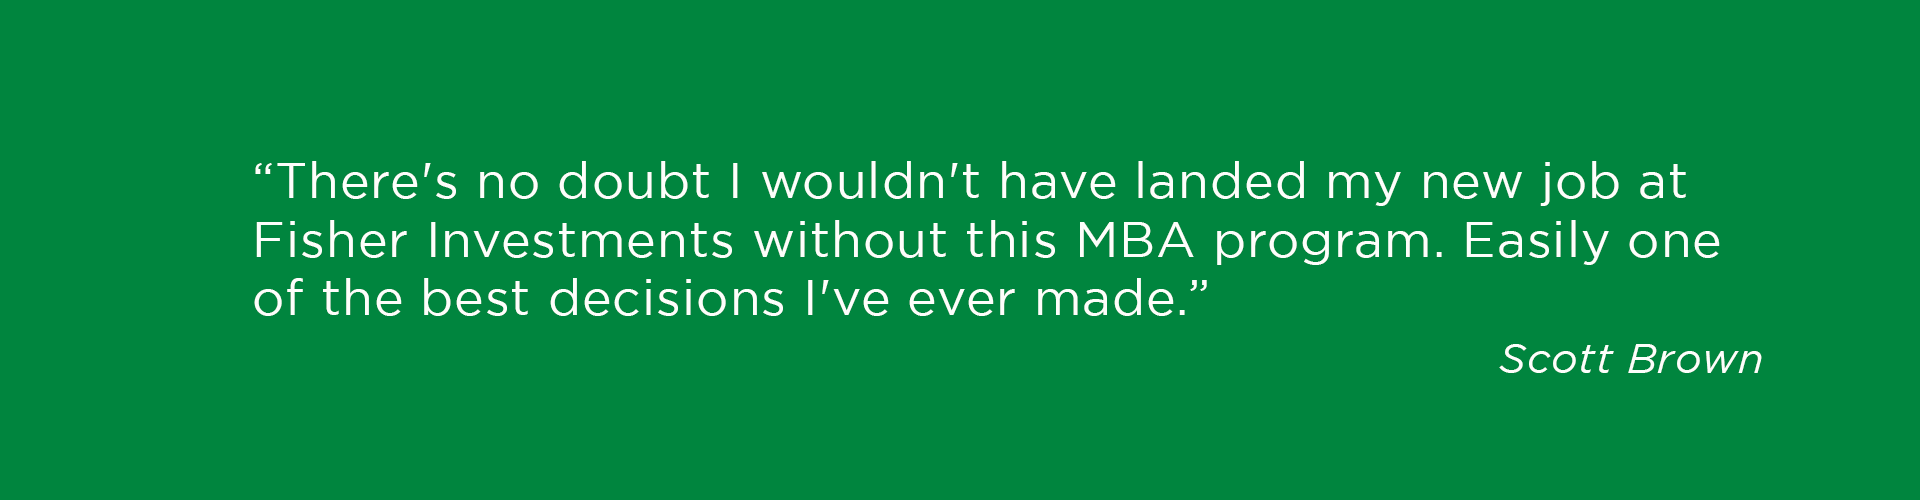 There's no doubt I wouldn't have landed my new job without this MBA program.